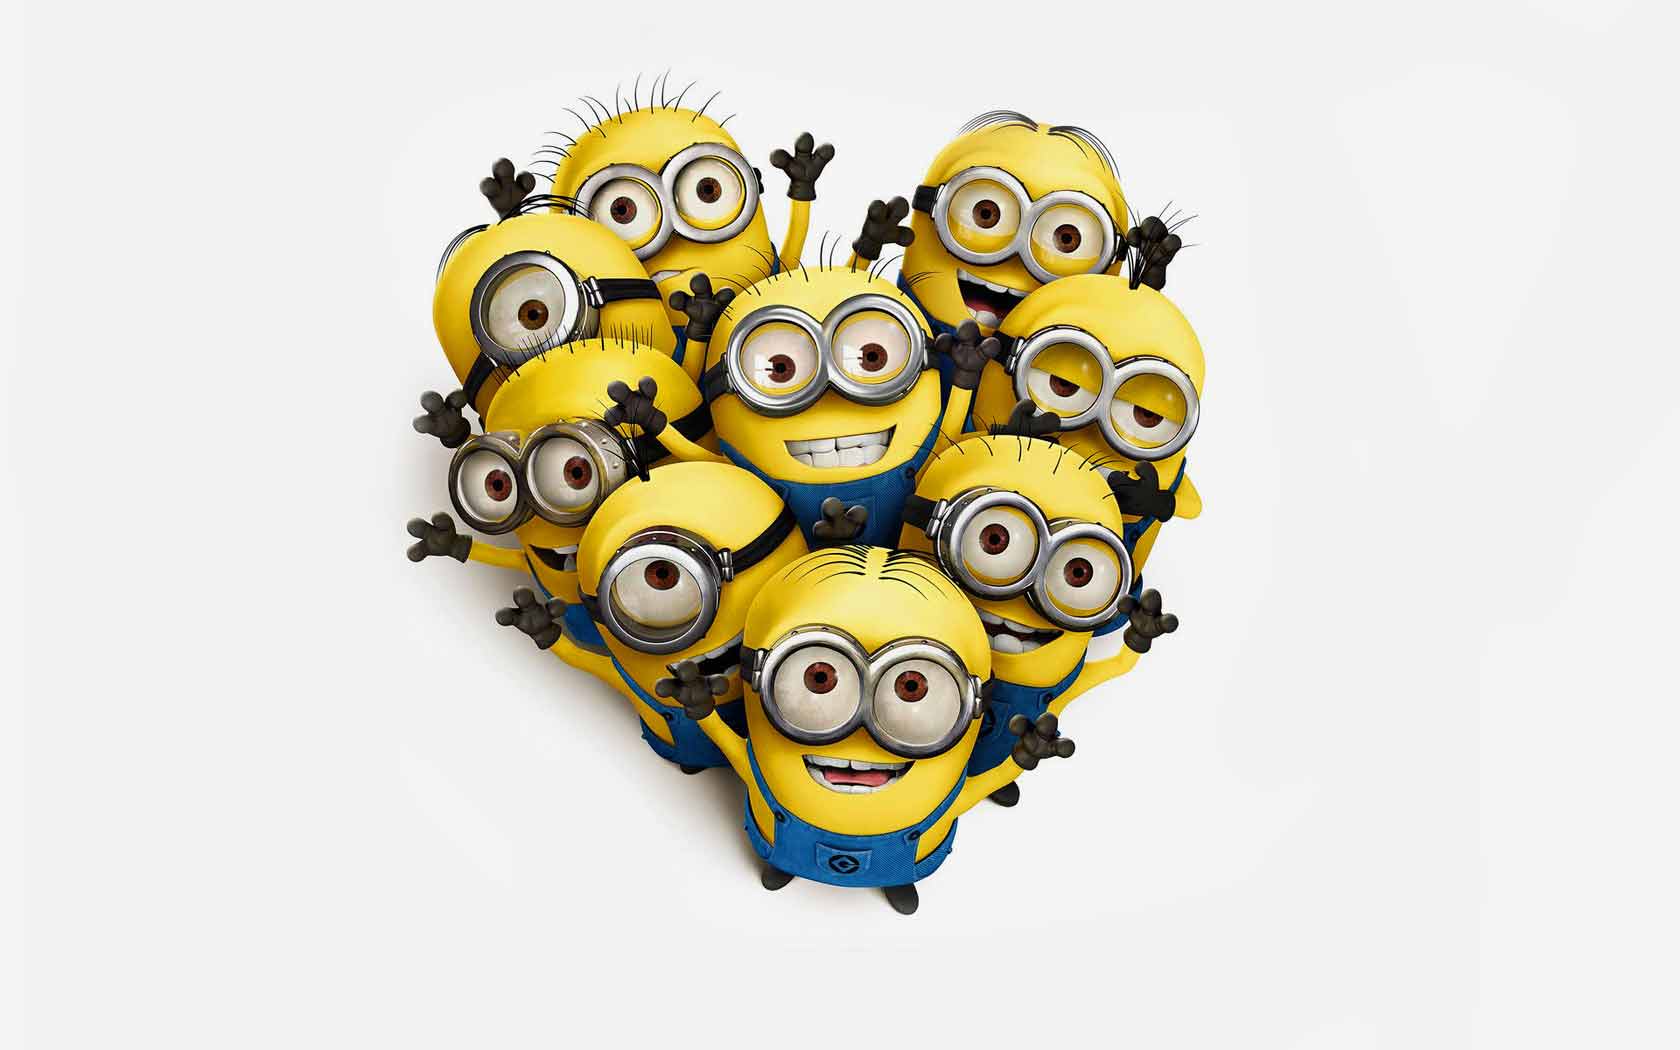   wallpapers despicable me2 movie wallpapers despicable me wallpapers